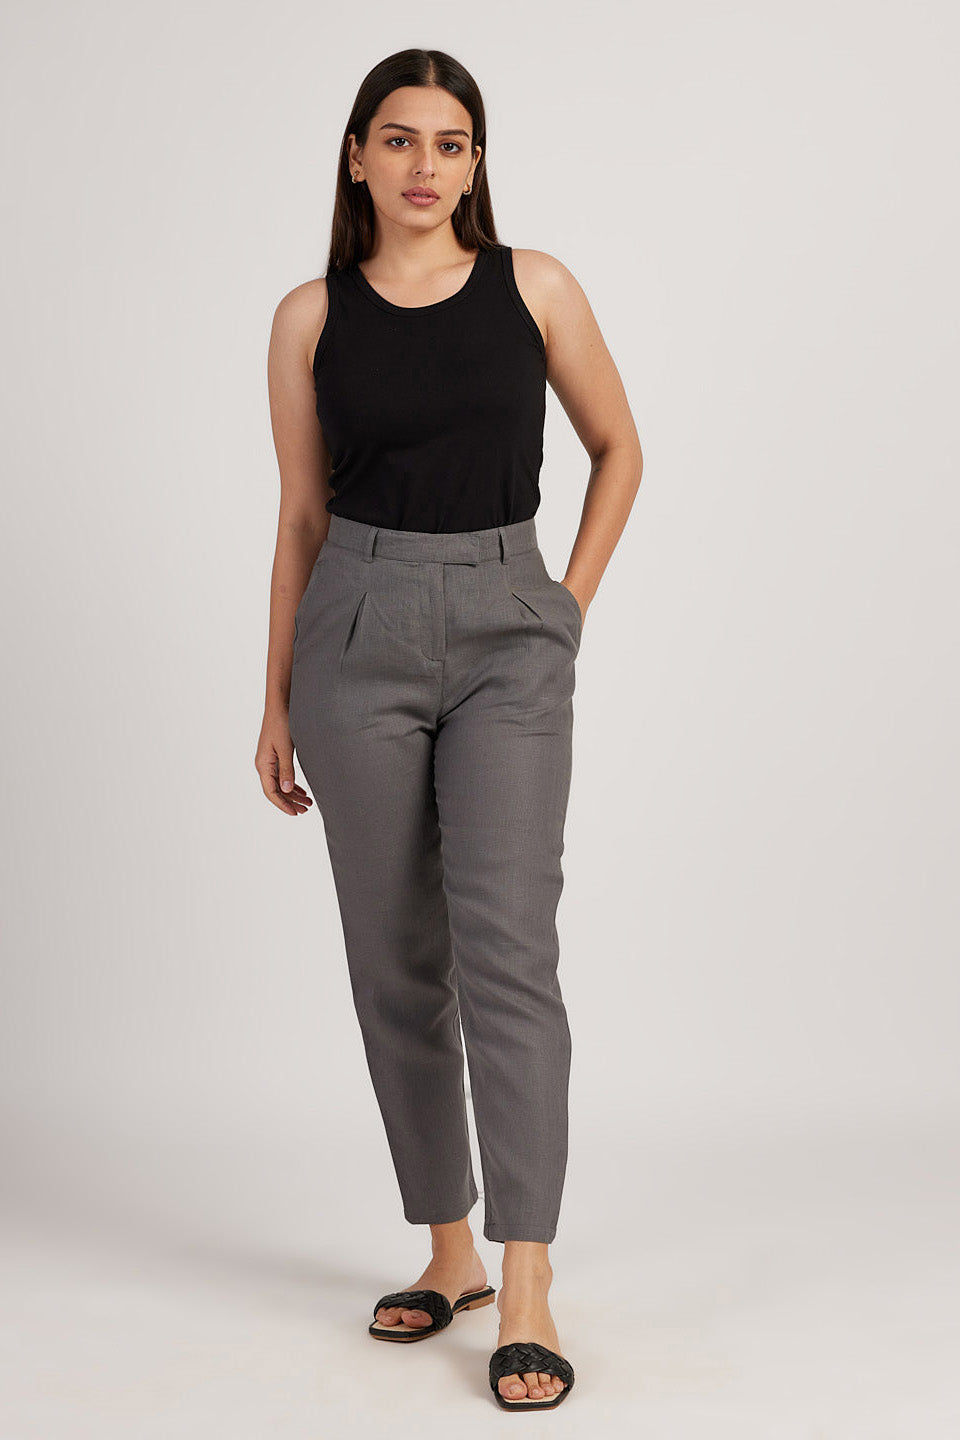 Trousers for Women - The Linen Pleated Trousers for Women Slate Grey | Creatures of Habit